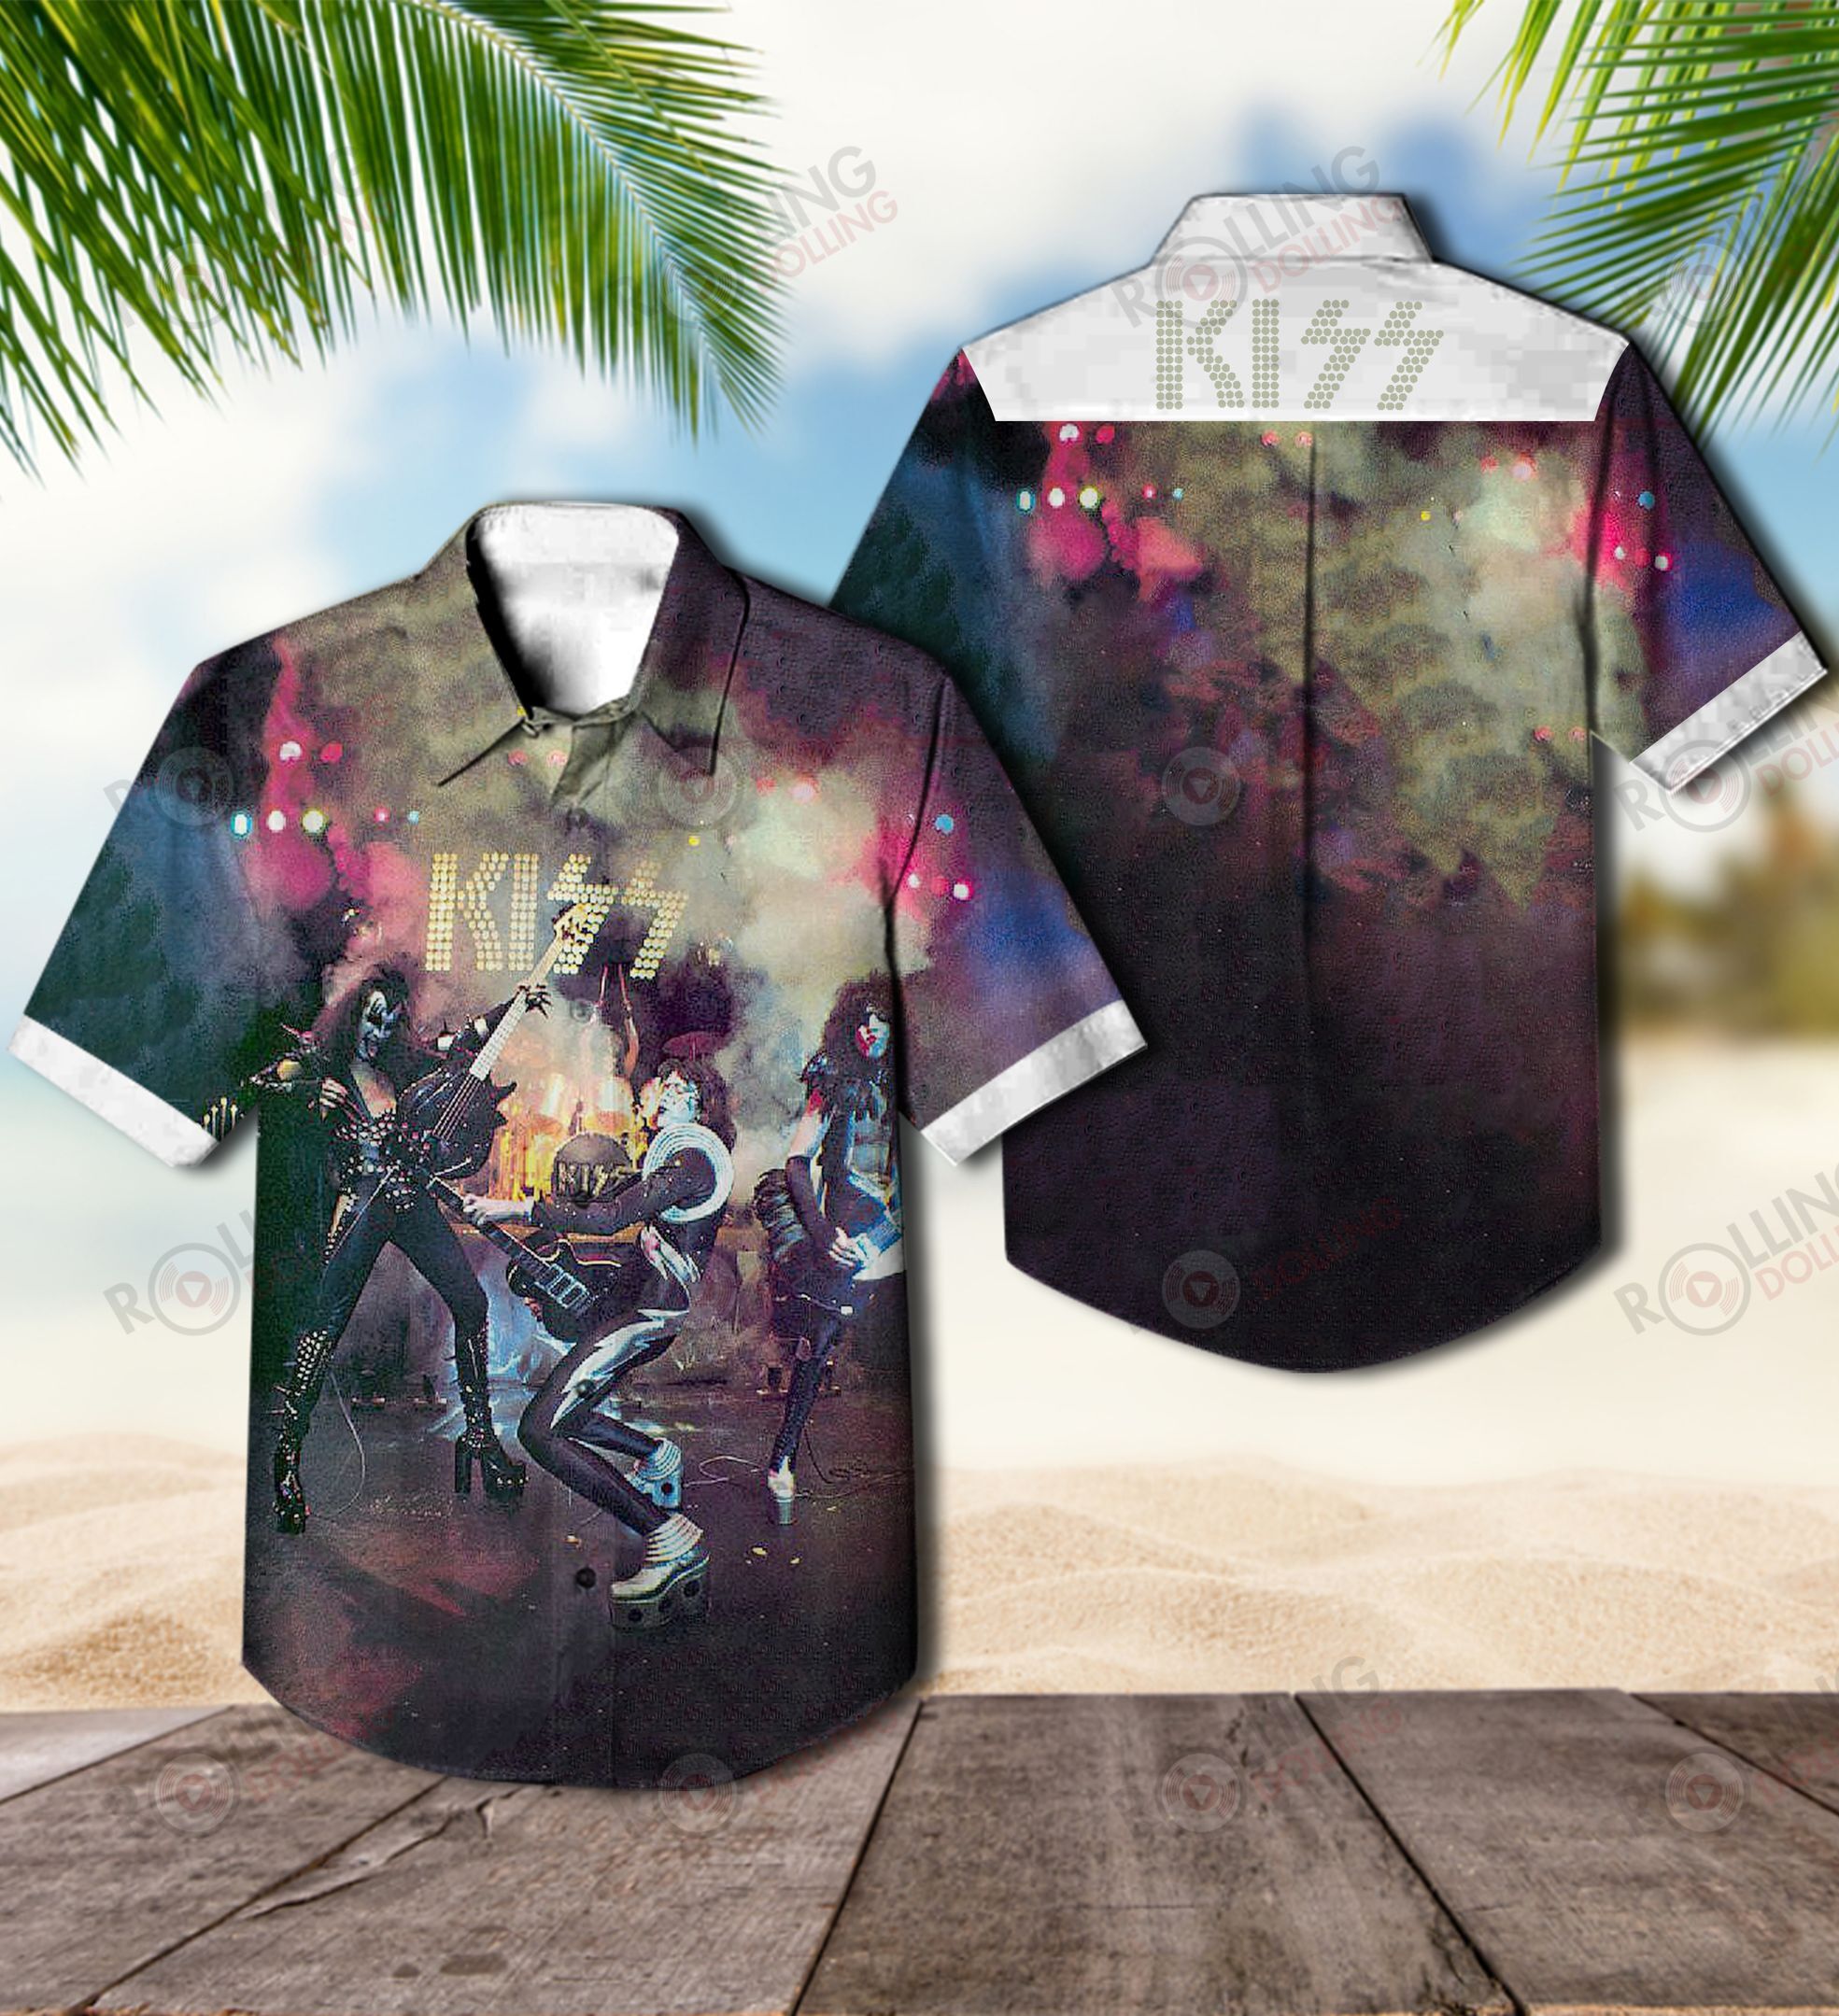 You'll have the perfect vacation outfit with this Hawaiian shirt 73